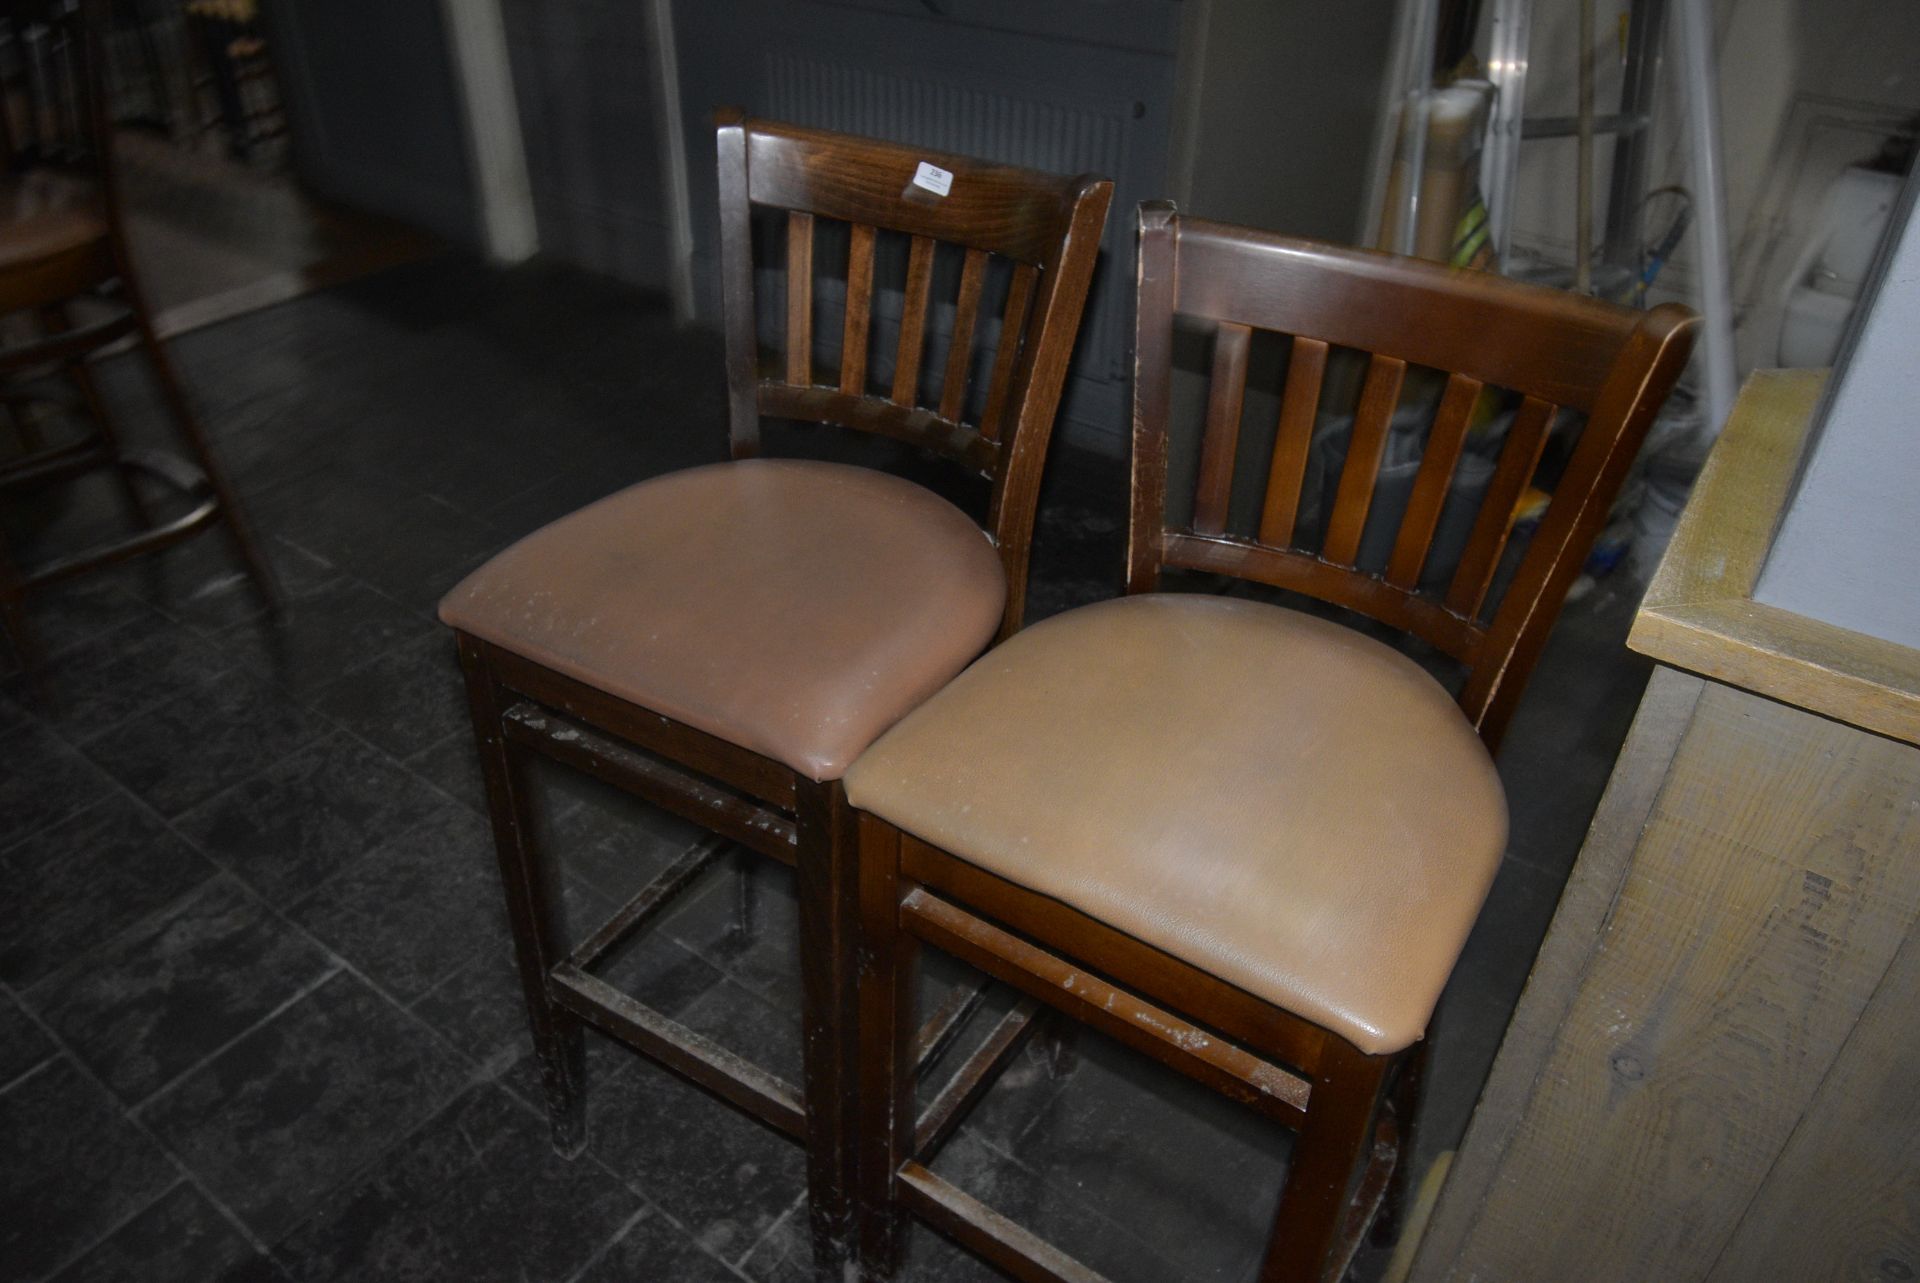 *Pair of Darkwood Framed Barstools with Upholstered Seats